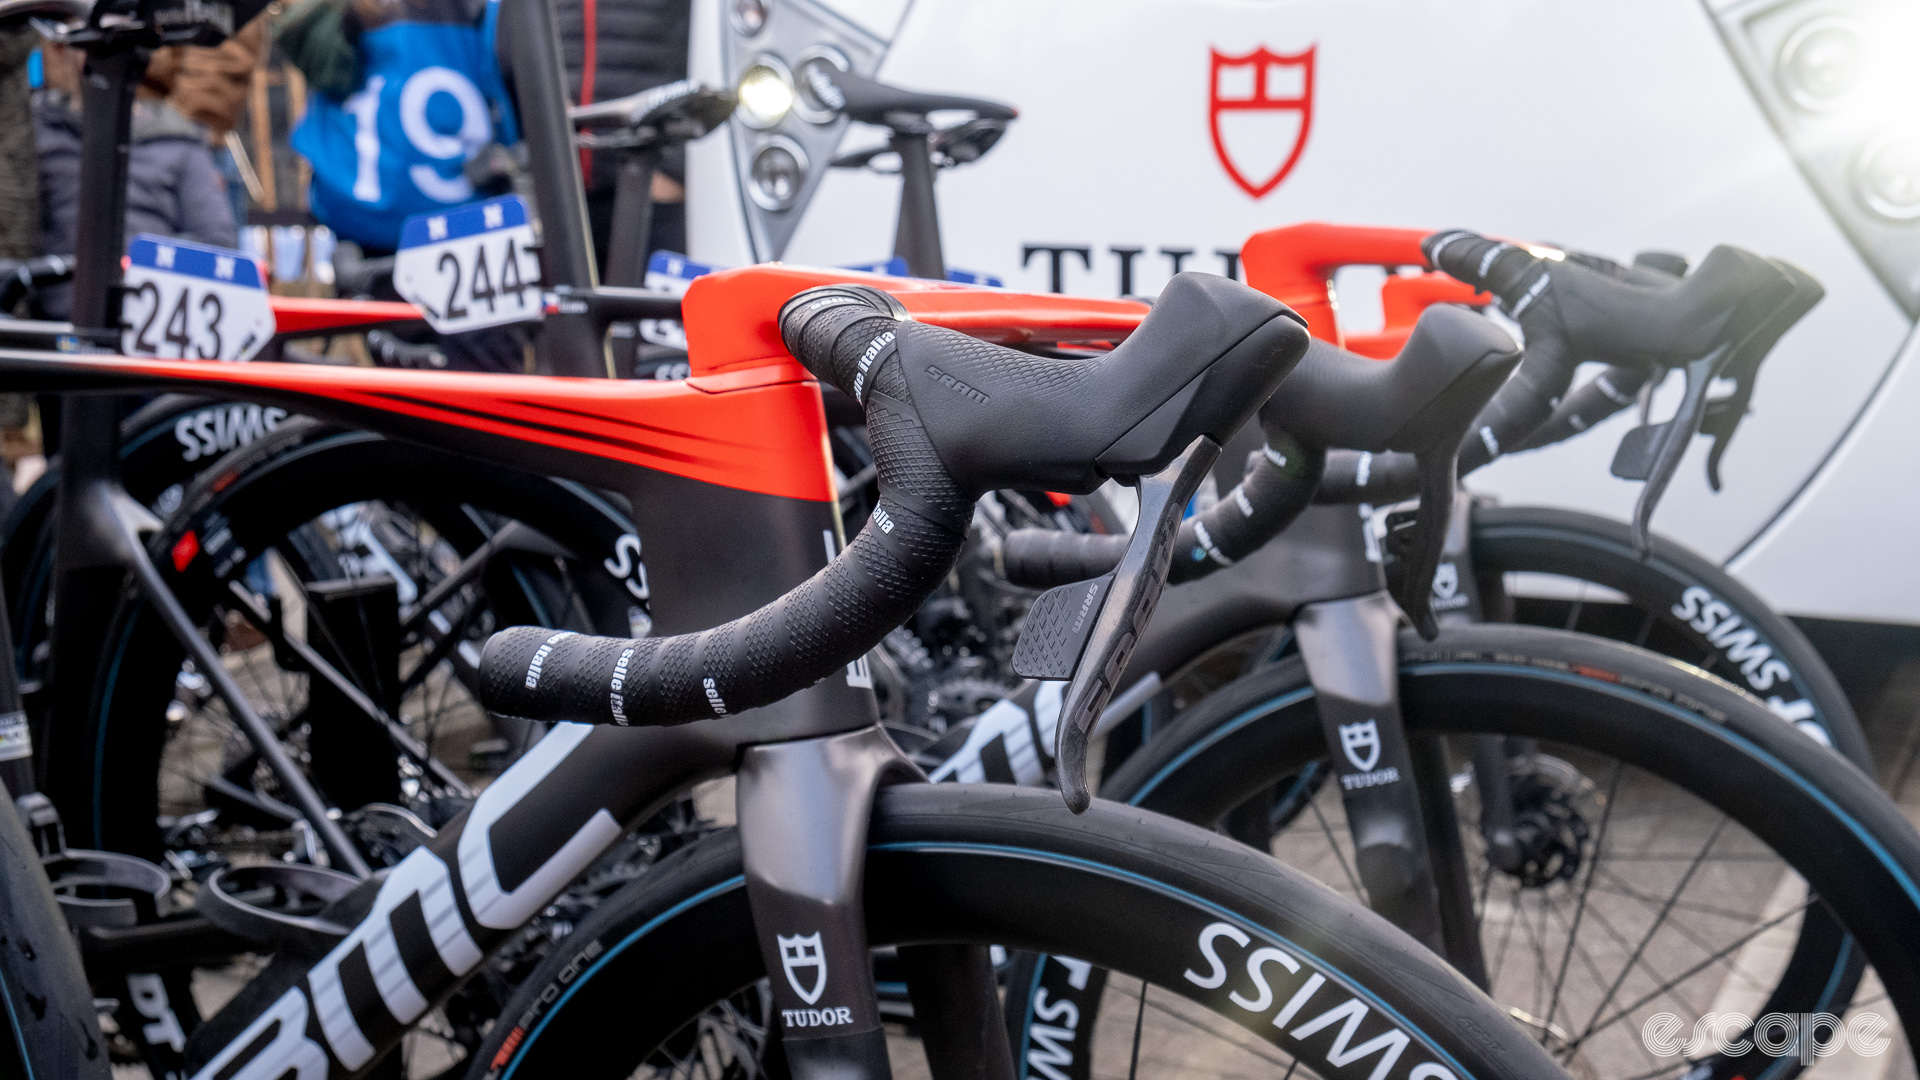 The image shows SRAM Red levers tilted inward and down on BMC handlebars